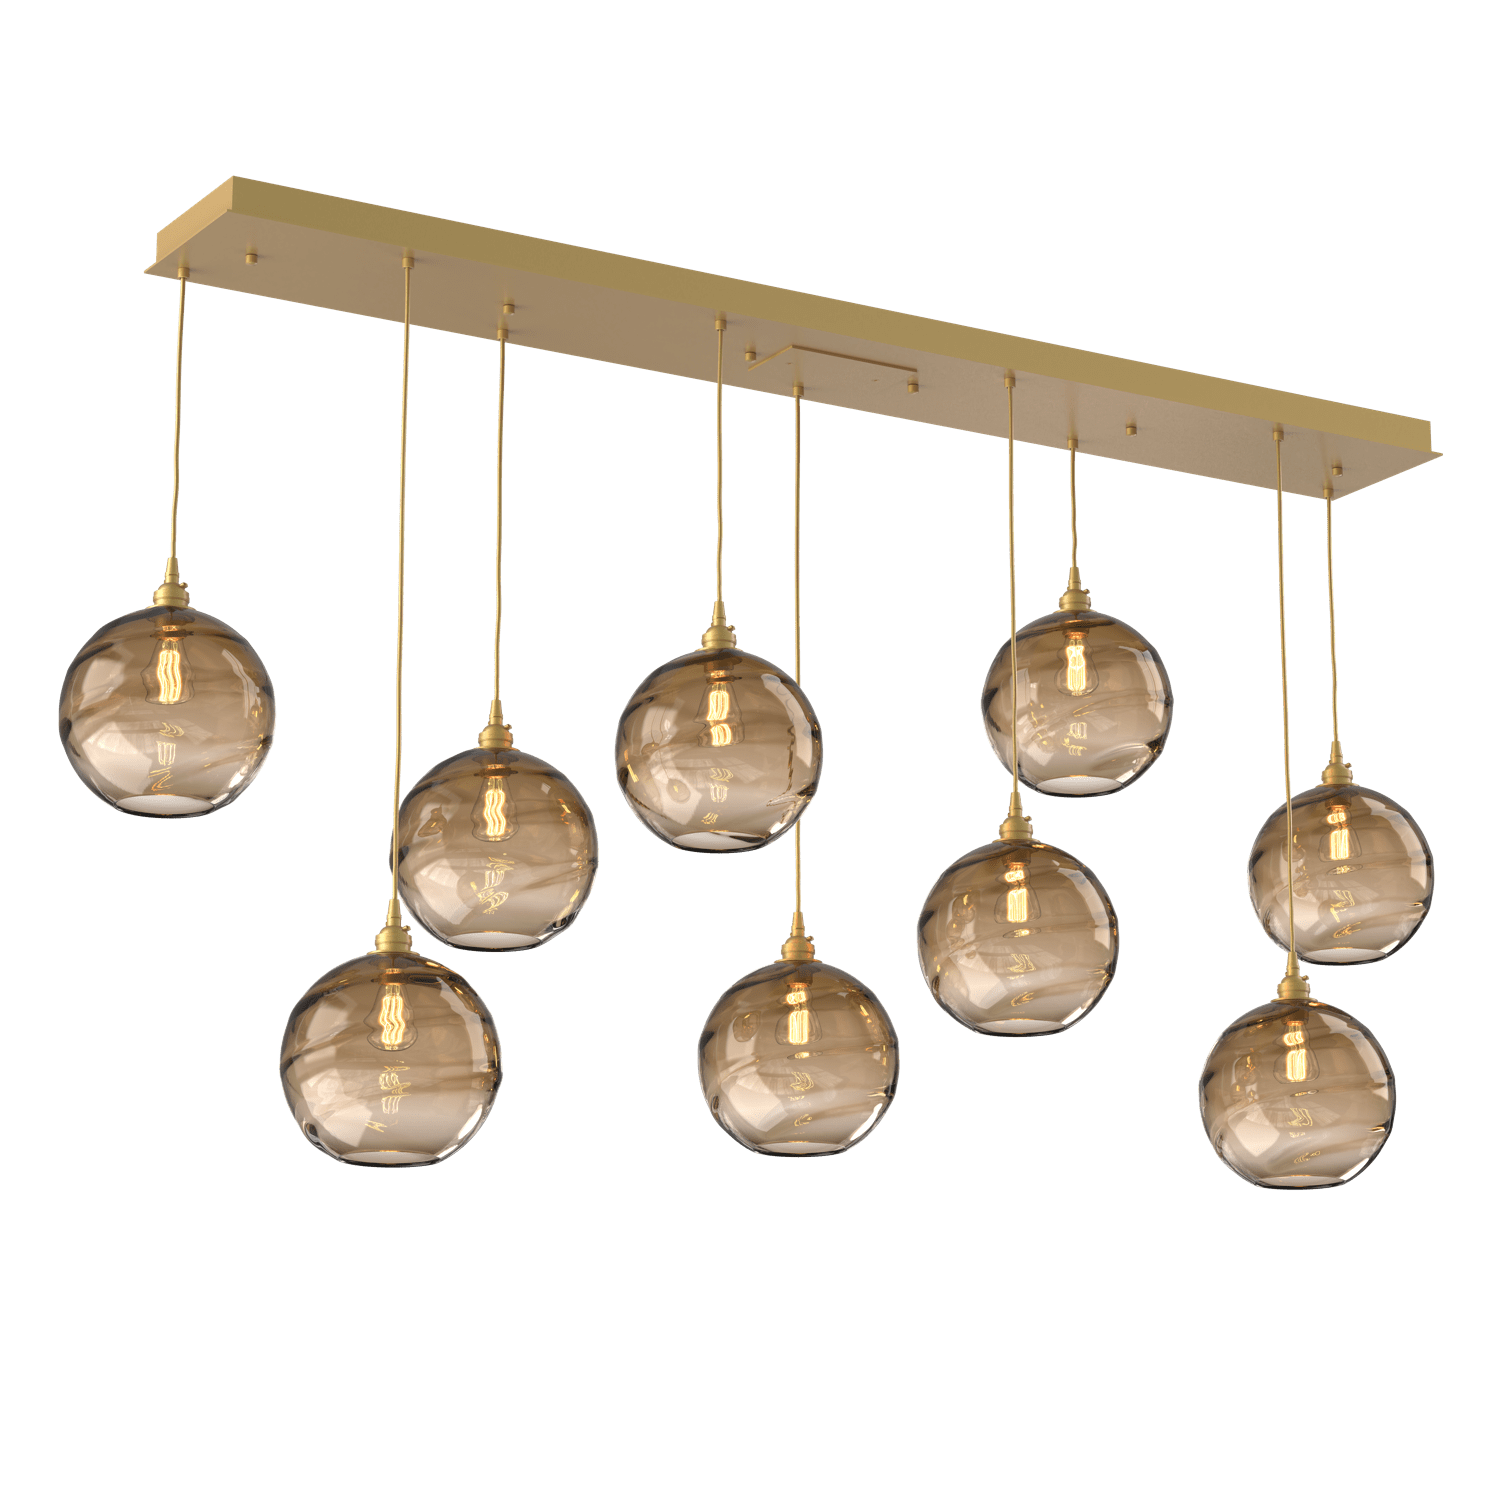 PLB0047-09-GB-OB-Hammerton-Studio-Optic-Blown-Glass-Terra-9-light-linear-pendant-chandelier-with-gilded-brass-finish-and-optic-bronze-blown-glass-shades-and-incandescent-lamping